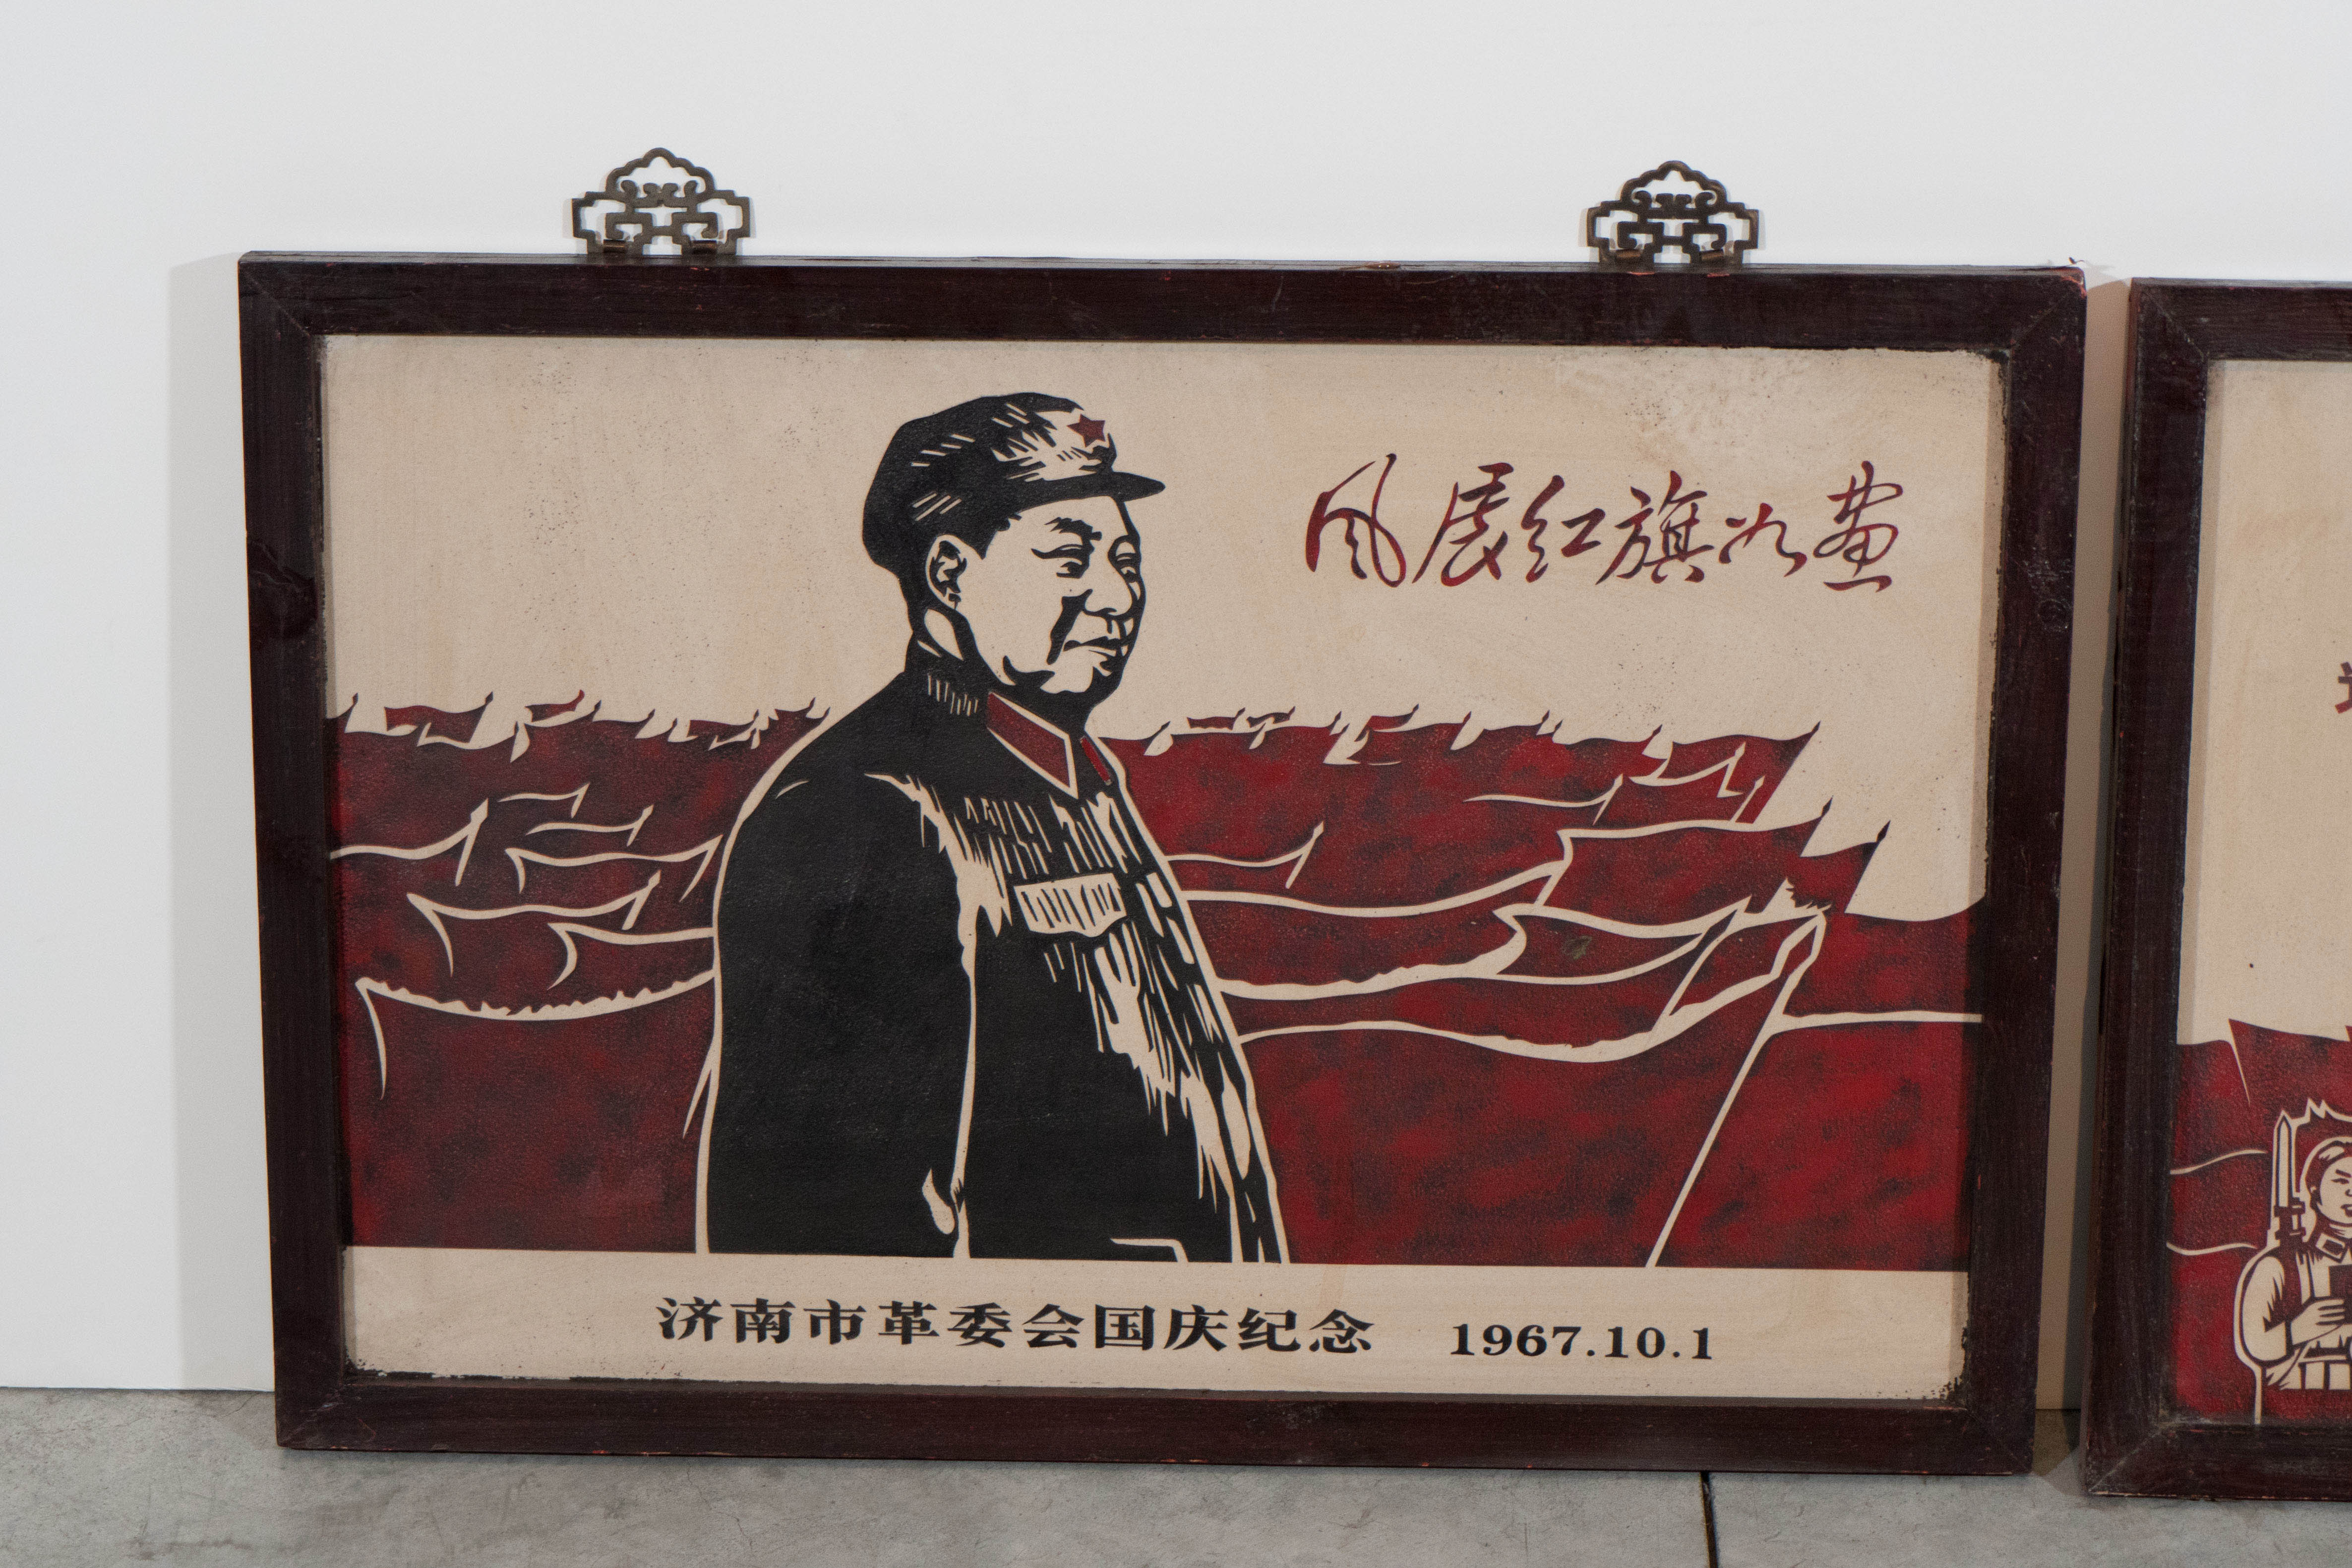 Two rarely seen ceramic cultural revolutions signs with great Mao imagery, bright colors and revolutionary slogans. Slogan on left hand image in main photo translates to "Red Flags Against The Wind / National Day Momentum -- Revolutionary